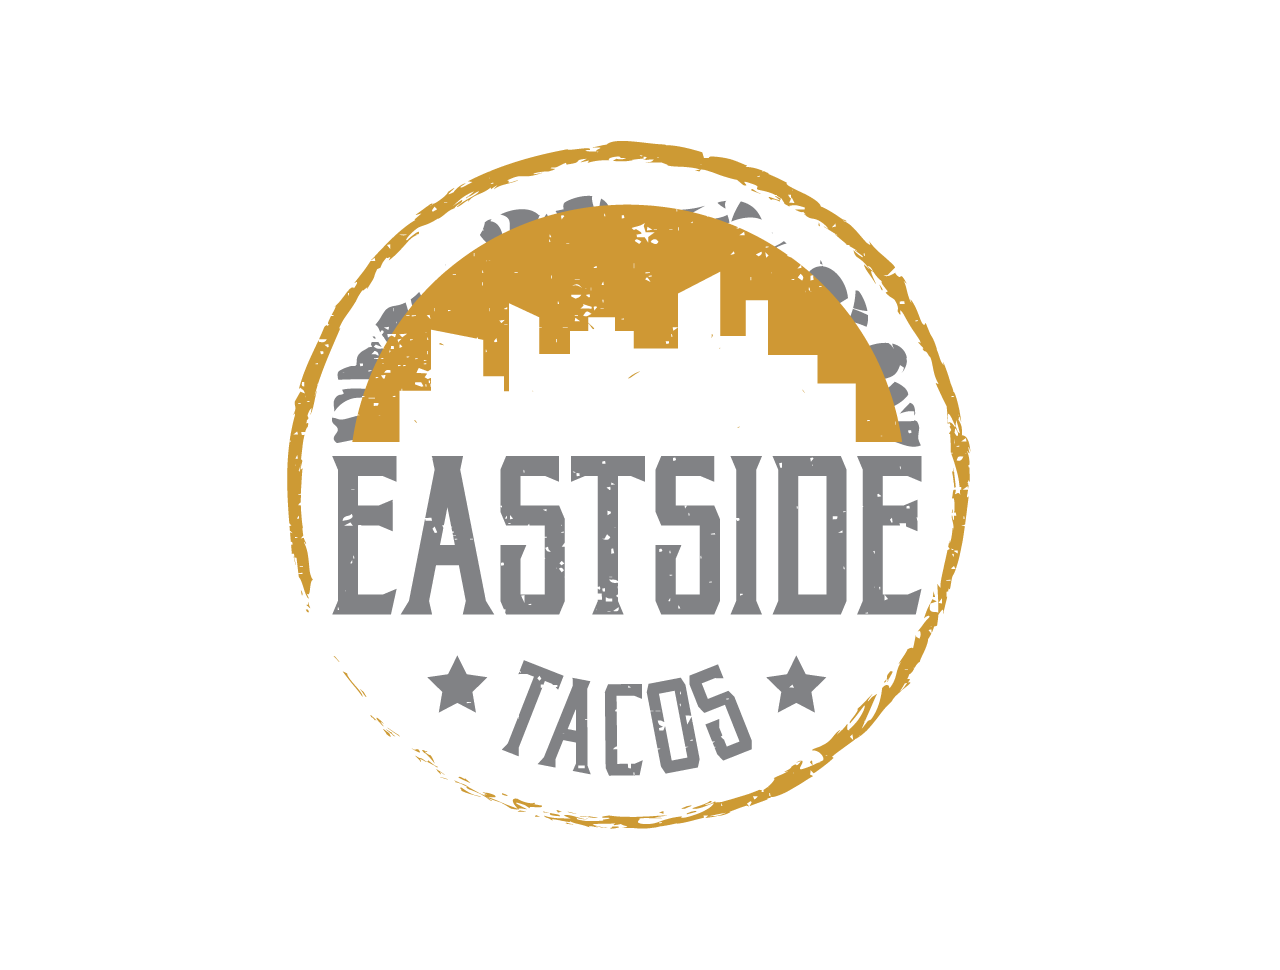 Eastside Tacos │Taco Catering & Mexican Food Catering